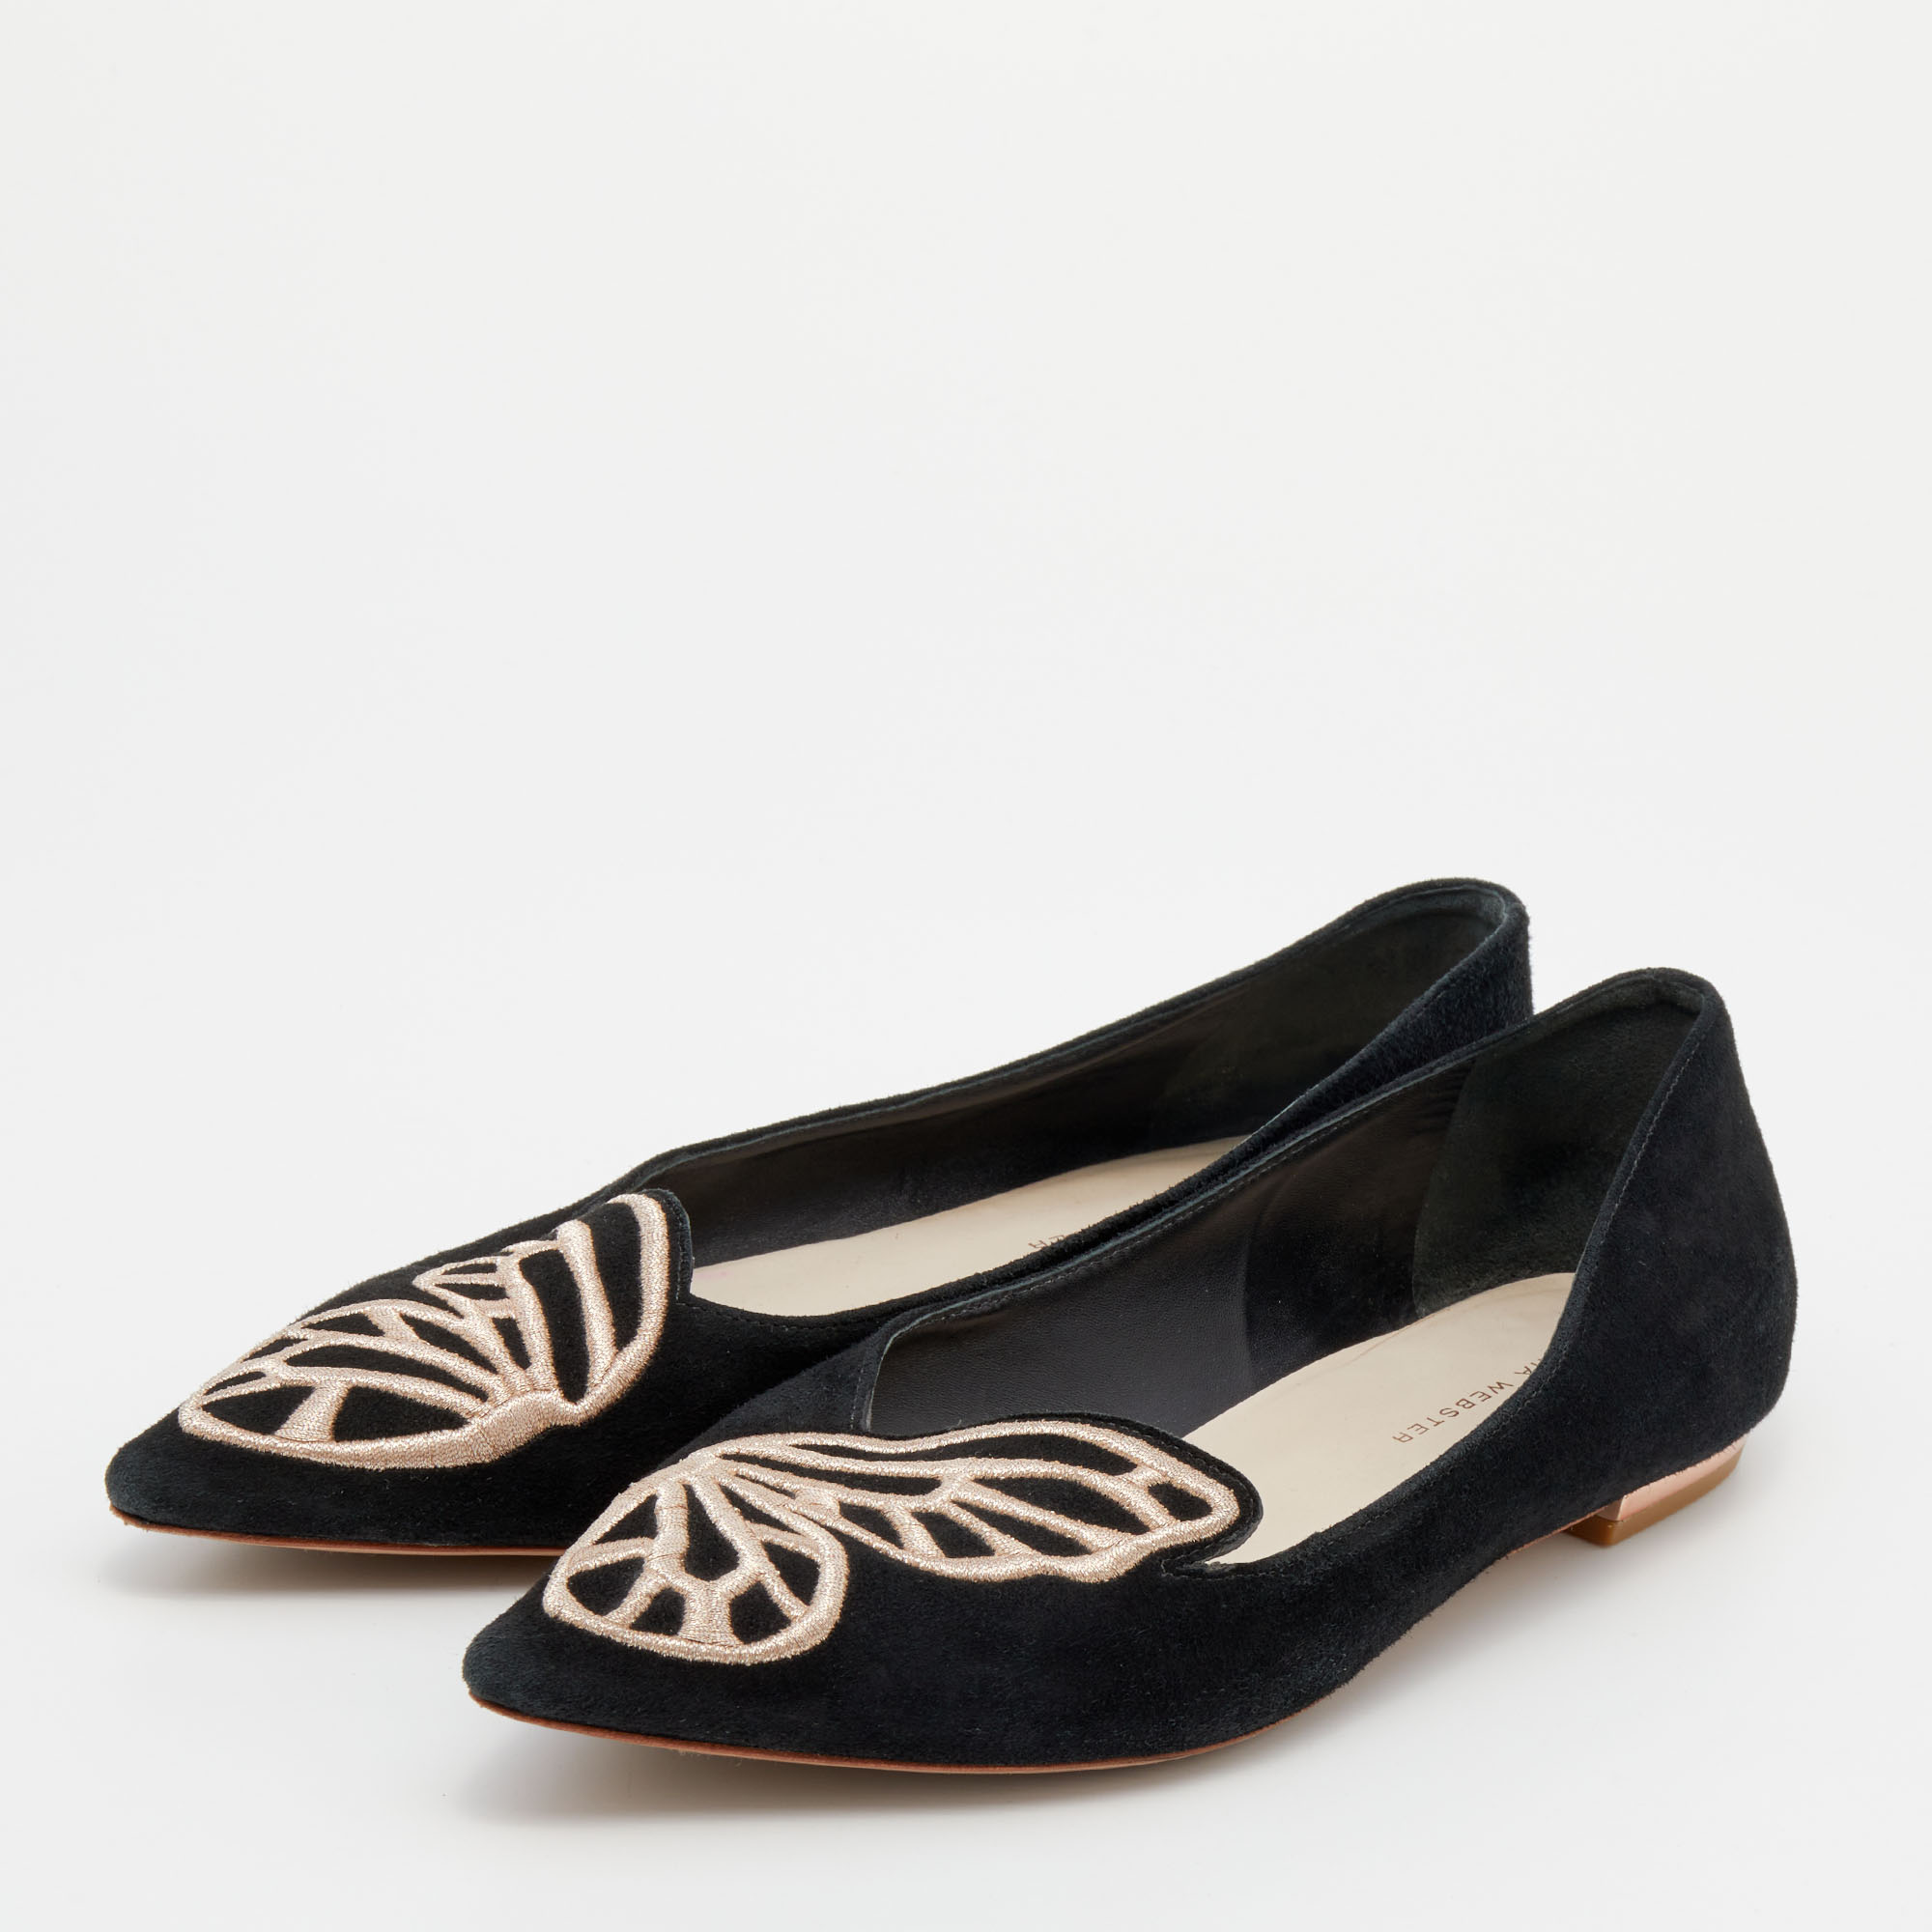 

Sophia Webster Black Embroidered Suede Bibi Butterfly Pointed Toe Ballet Flats Size